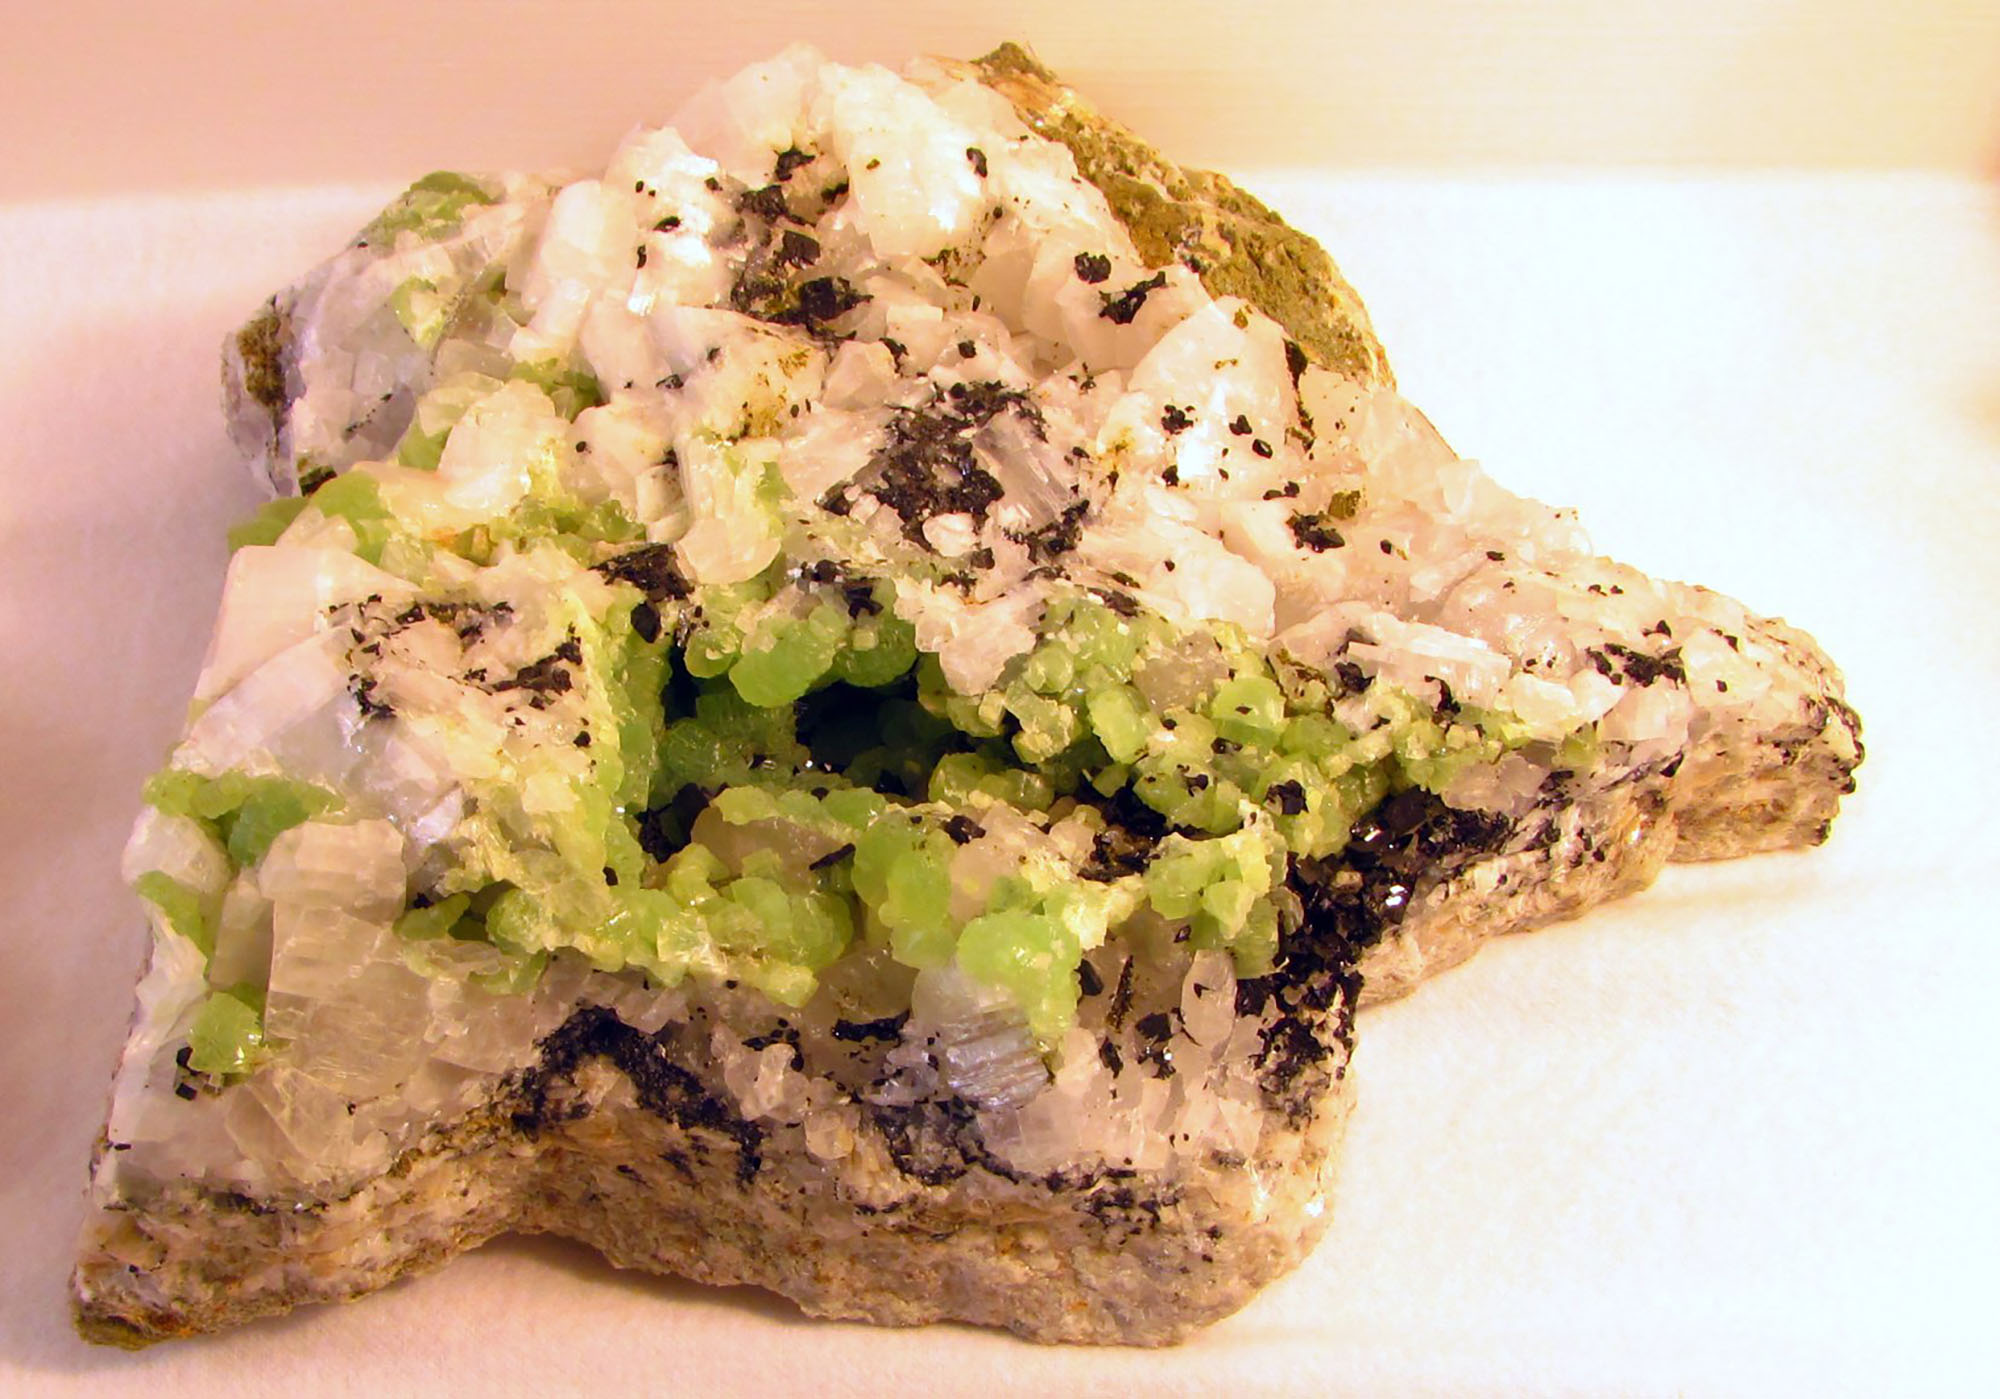 Photo of black babingtonite, green prehnite, and white calcite crystals in a rock from Massachusetts.